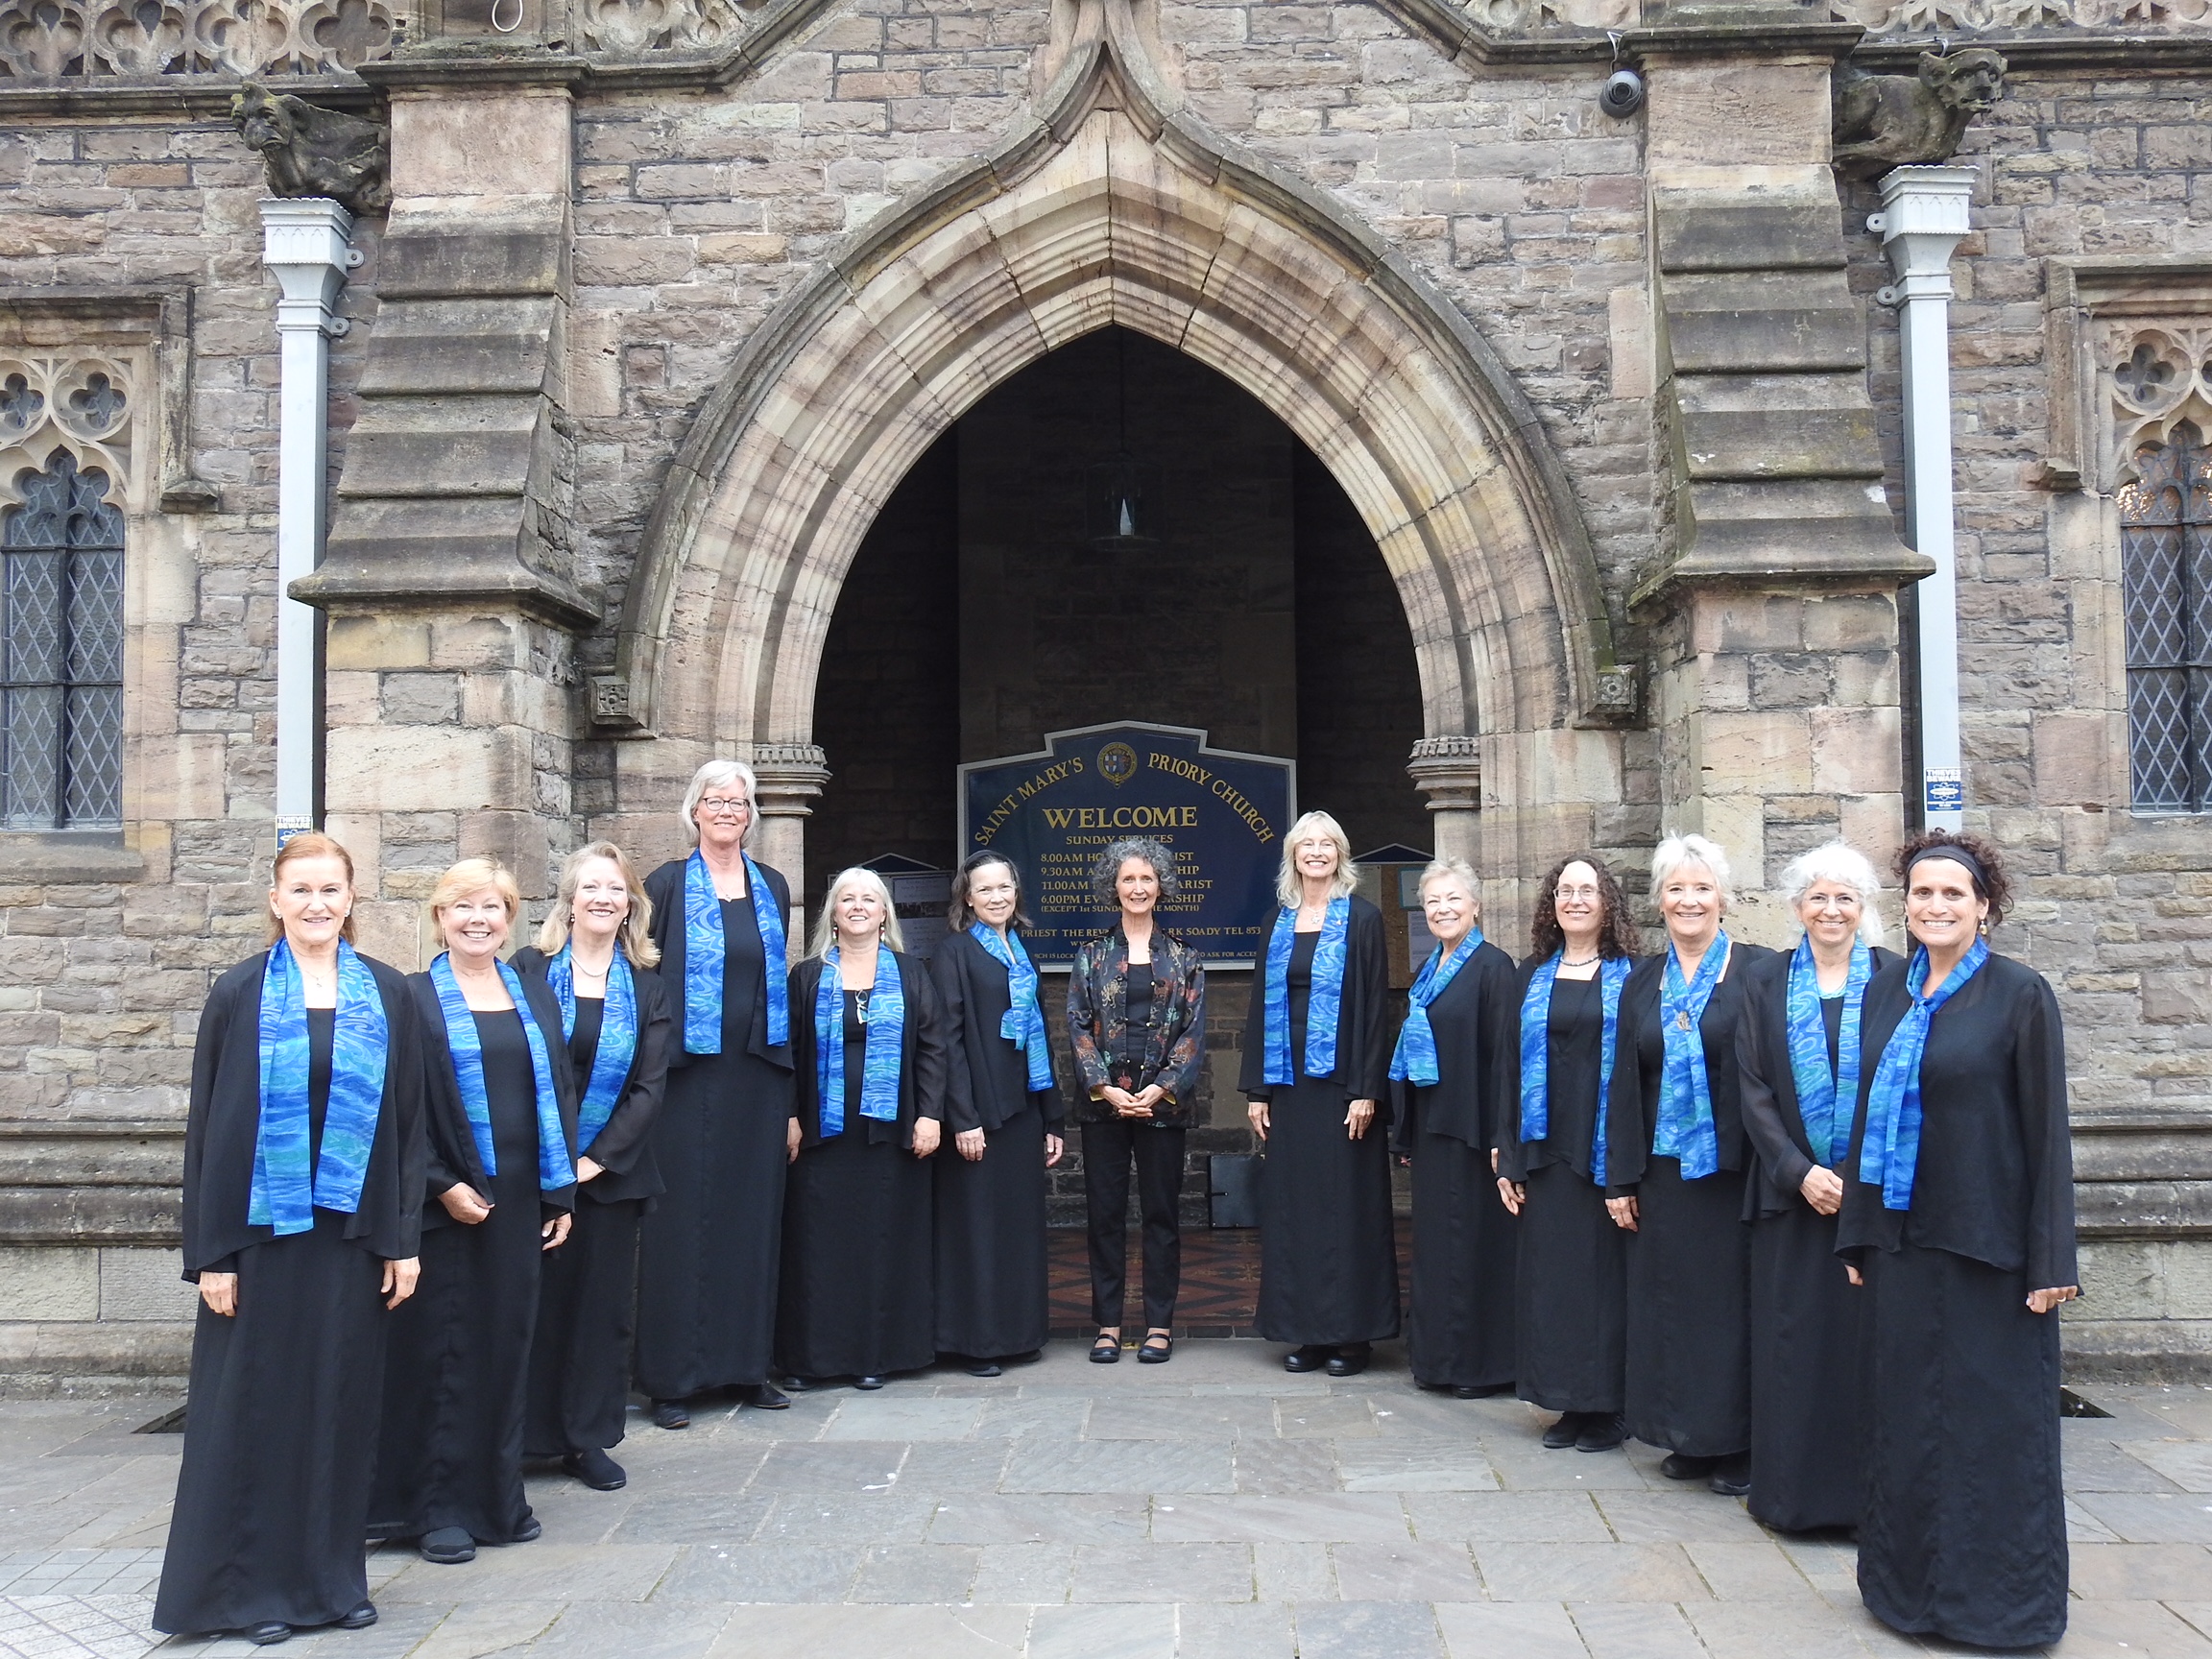 Group of singers, wearing black with turquoise scarves, standing in front of stone church entrance, Abergavenny, Wales, 2018